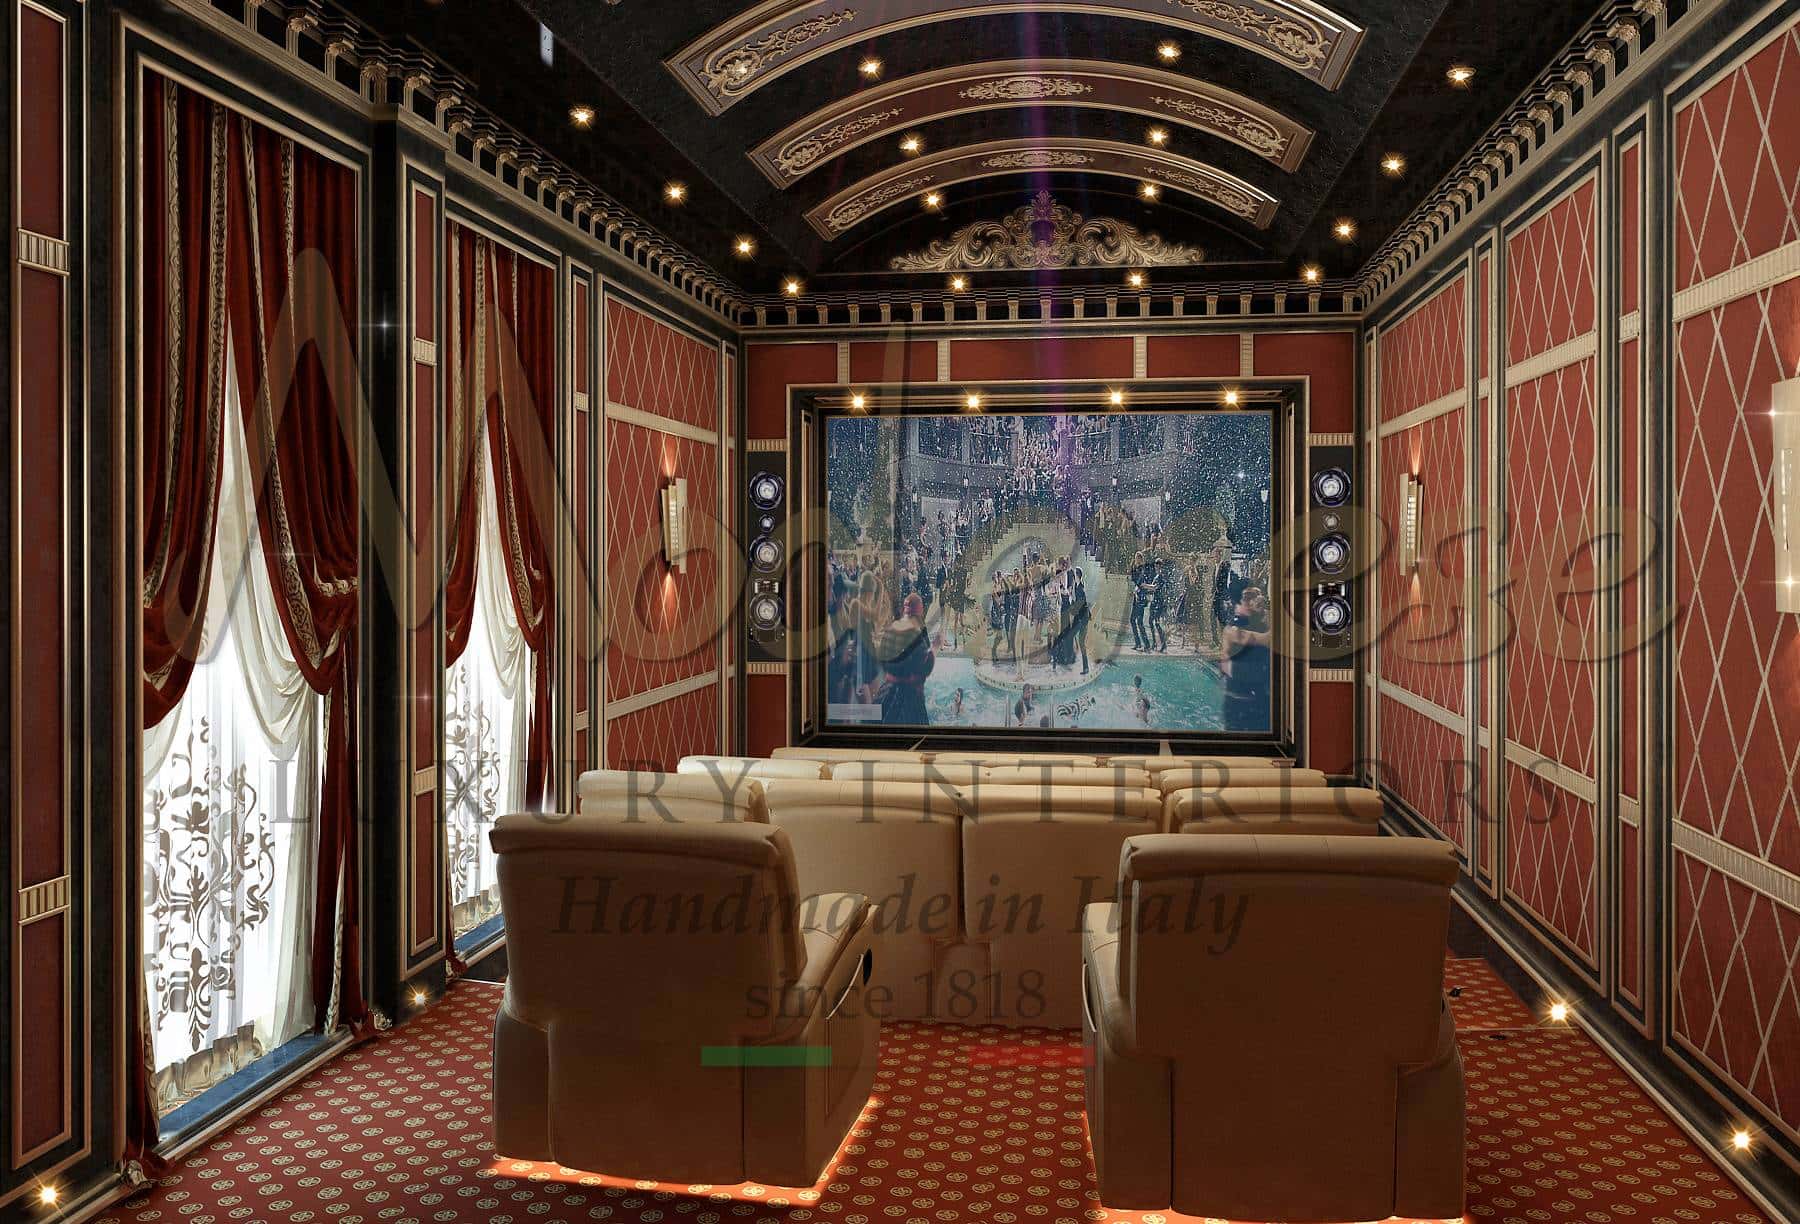 home cinema custom theater decoration interior design service high-end Italian quality artisans production opulent walls decoration luxury sofas for home cinema classic models unique timeless traditional made in italy home decoration residential project